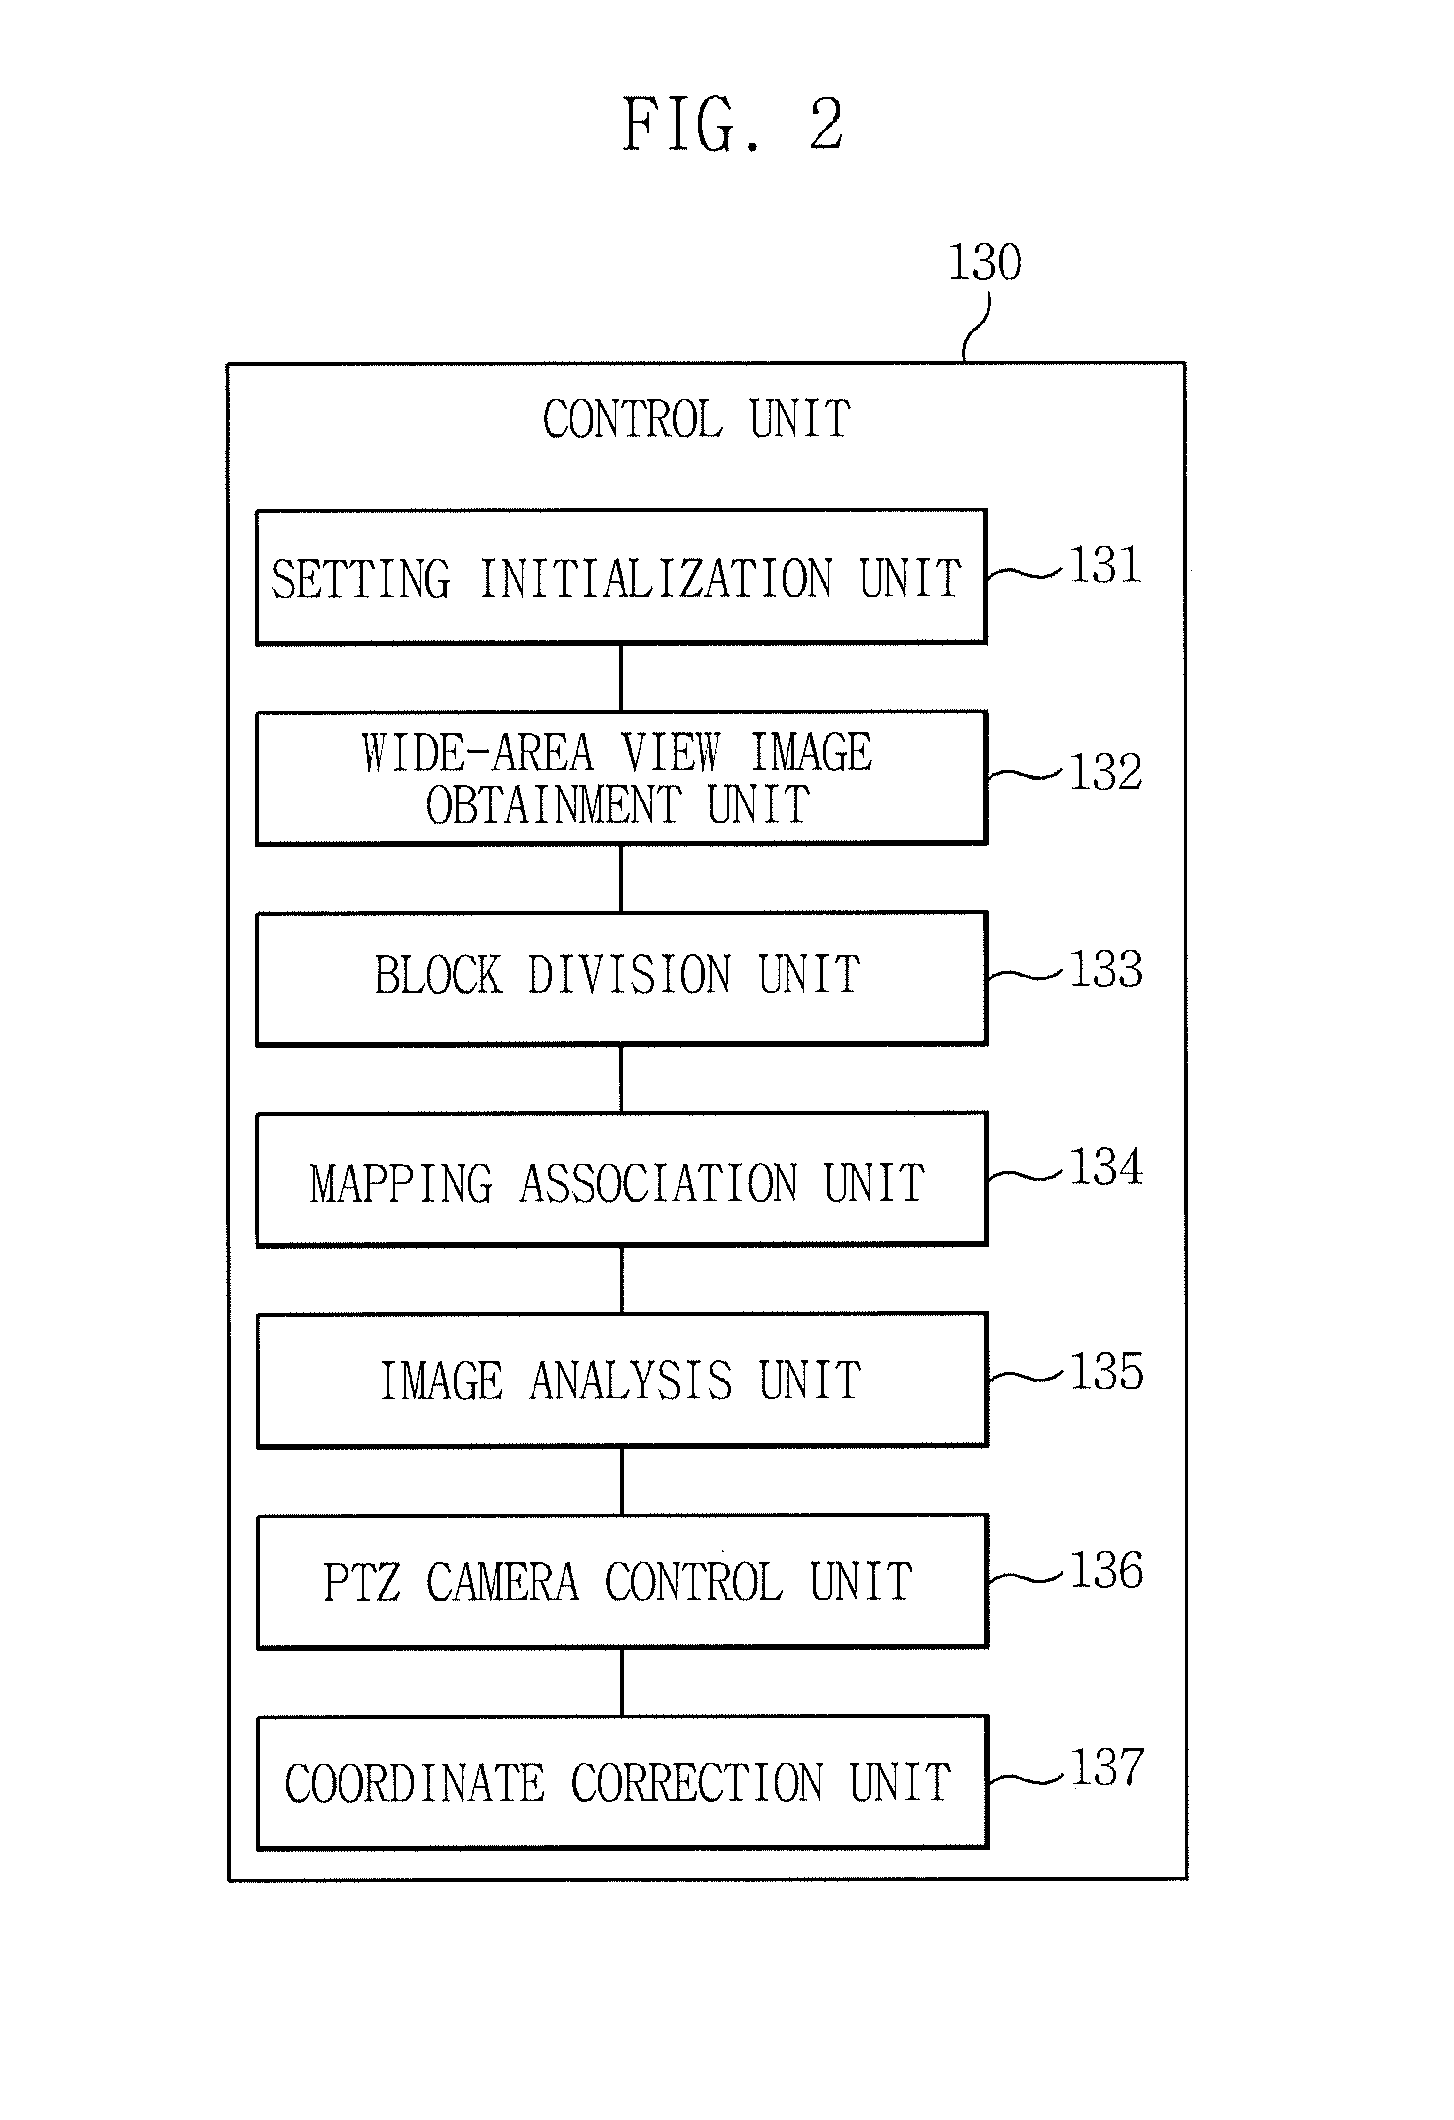 Object image capture apparatus and method